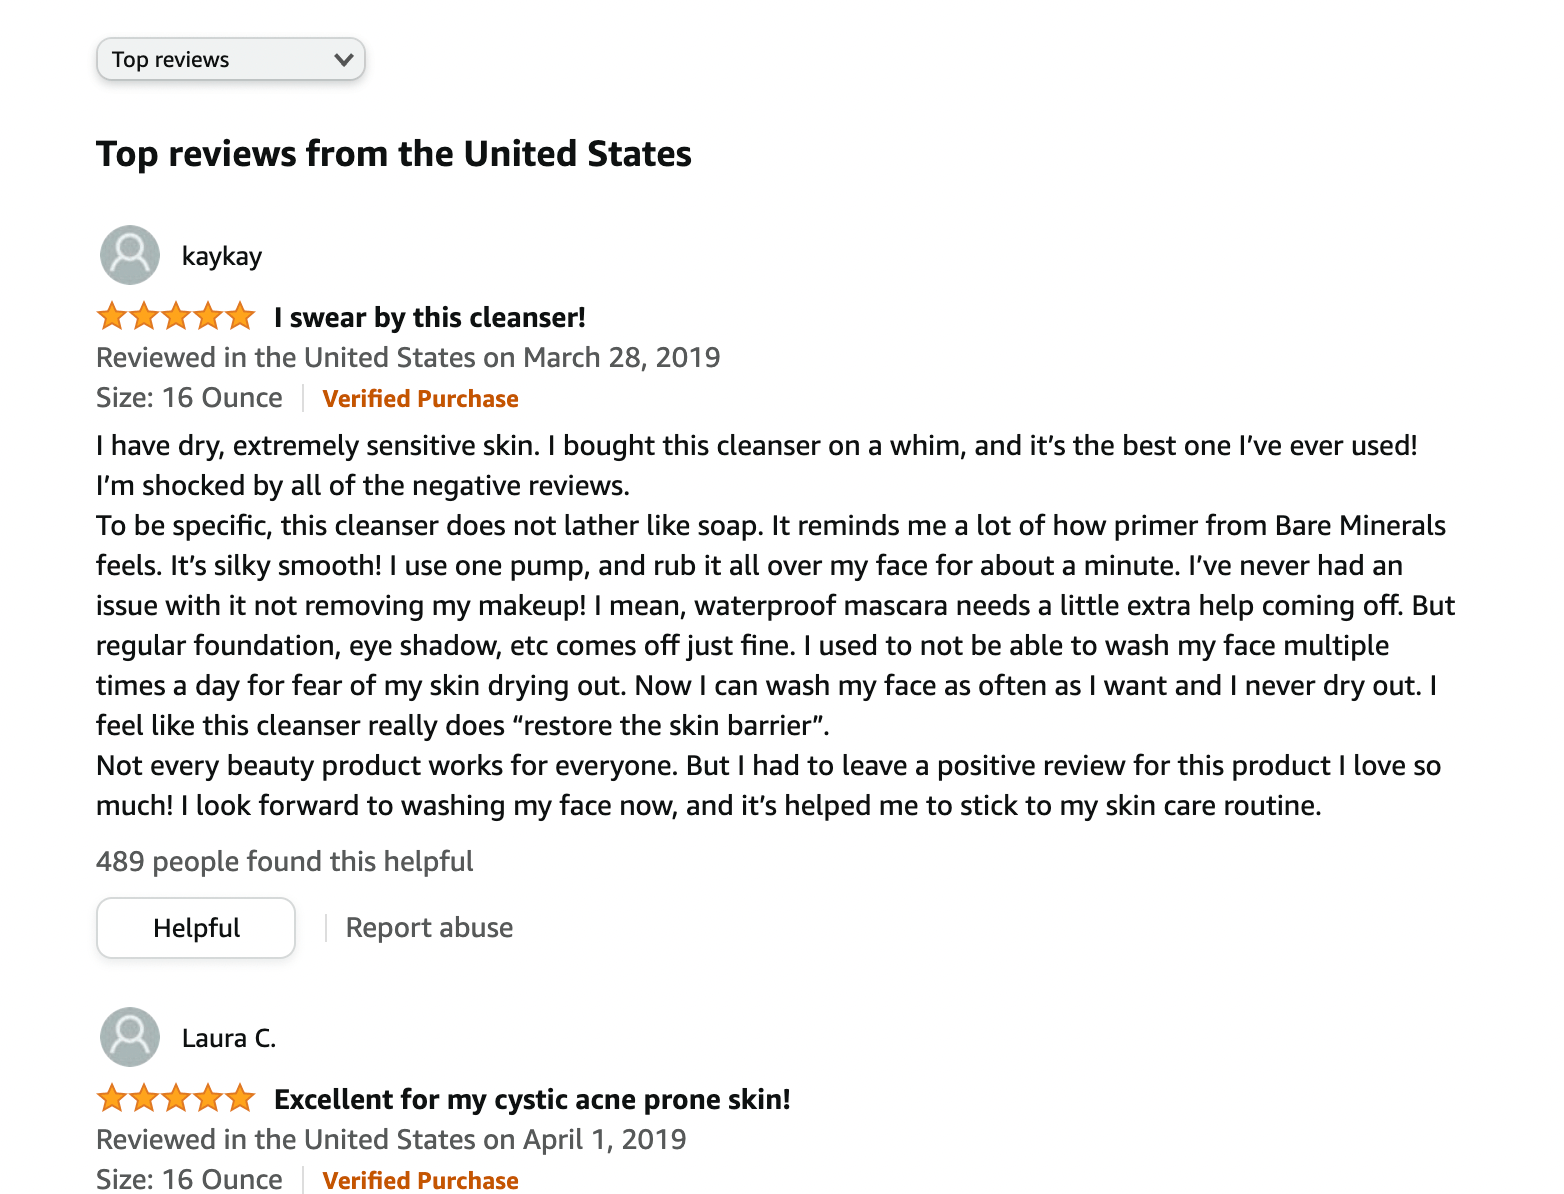 Two 5 star reviews for a cleanser on amazon